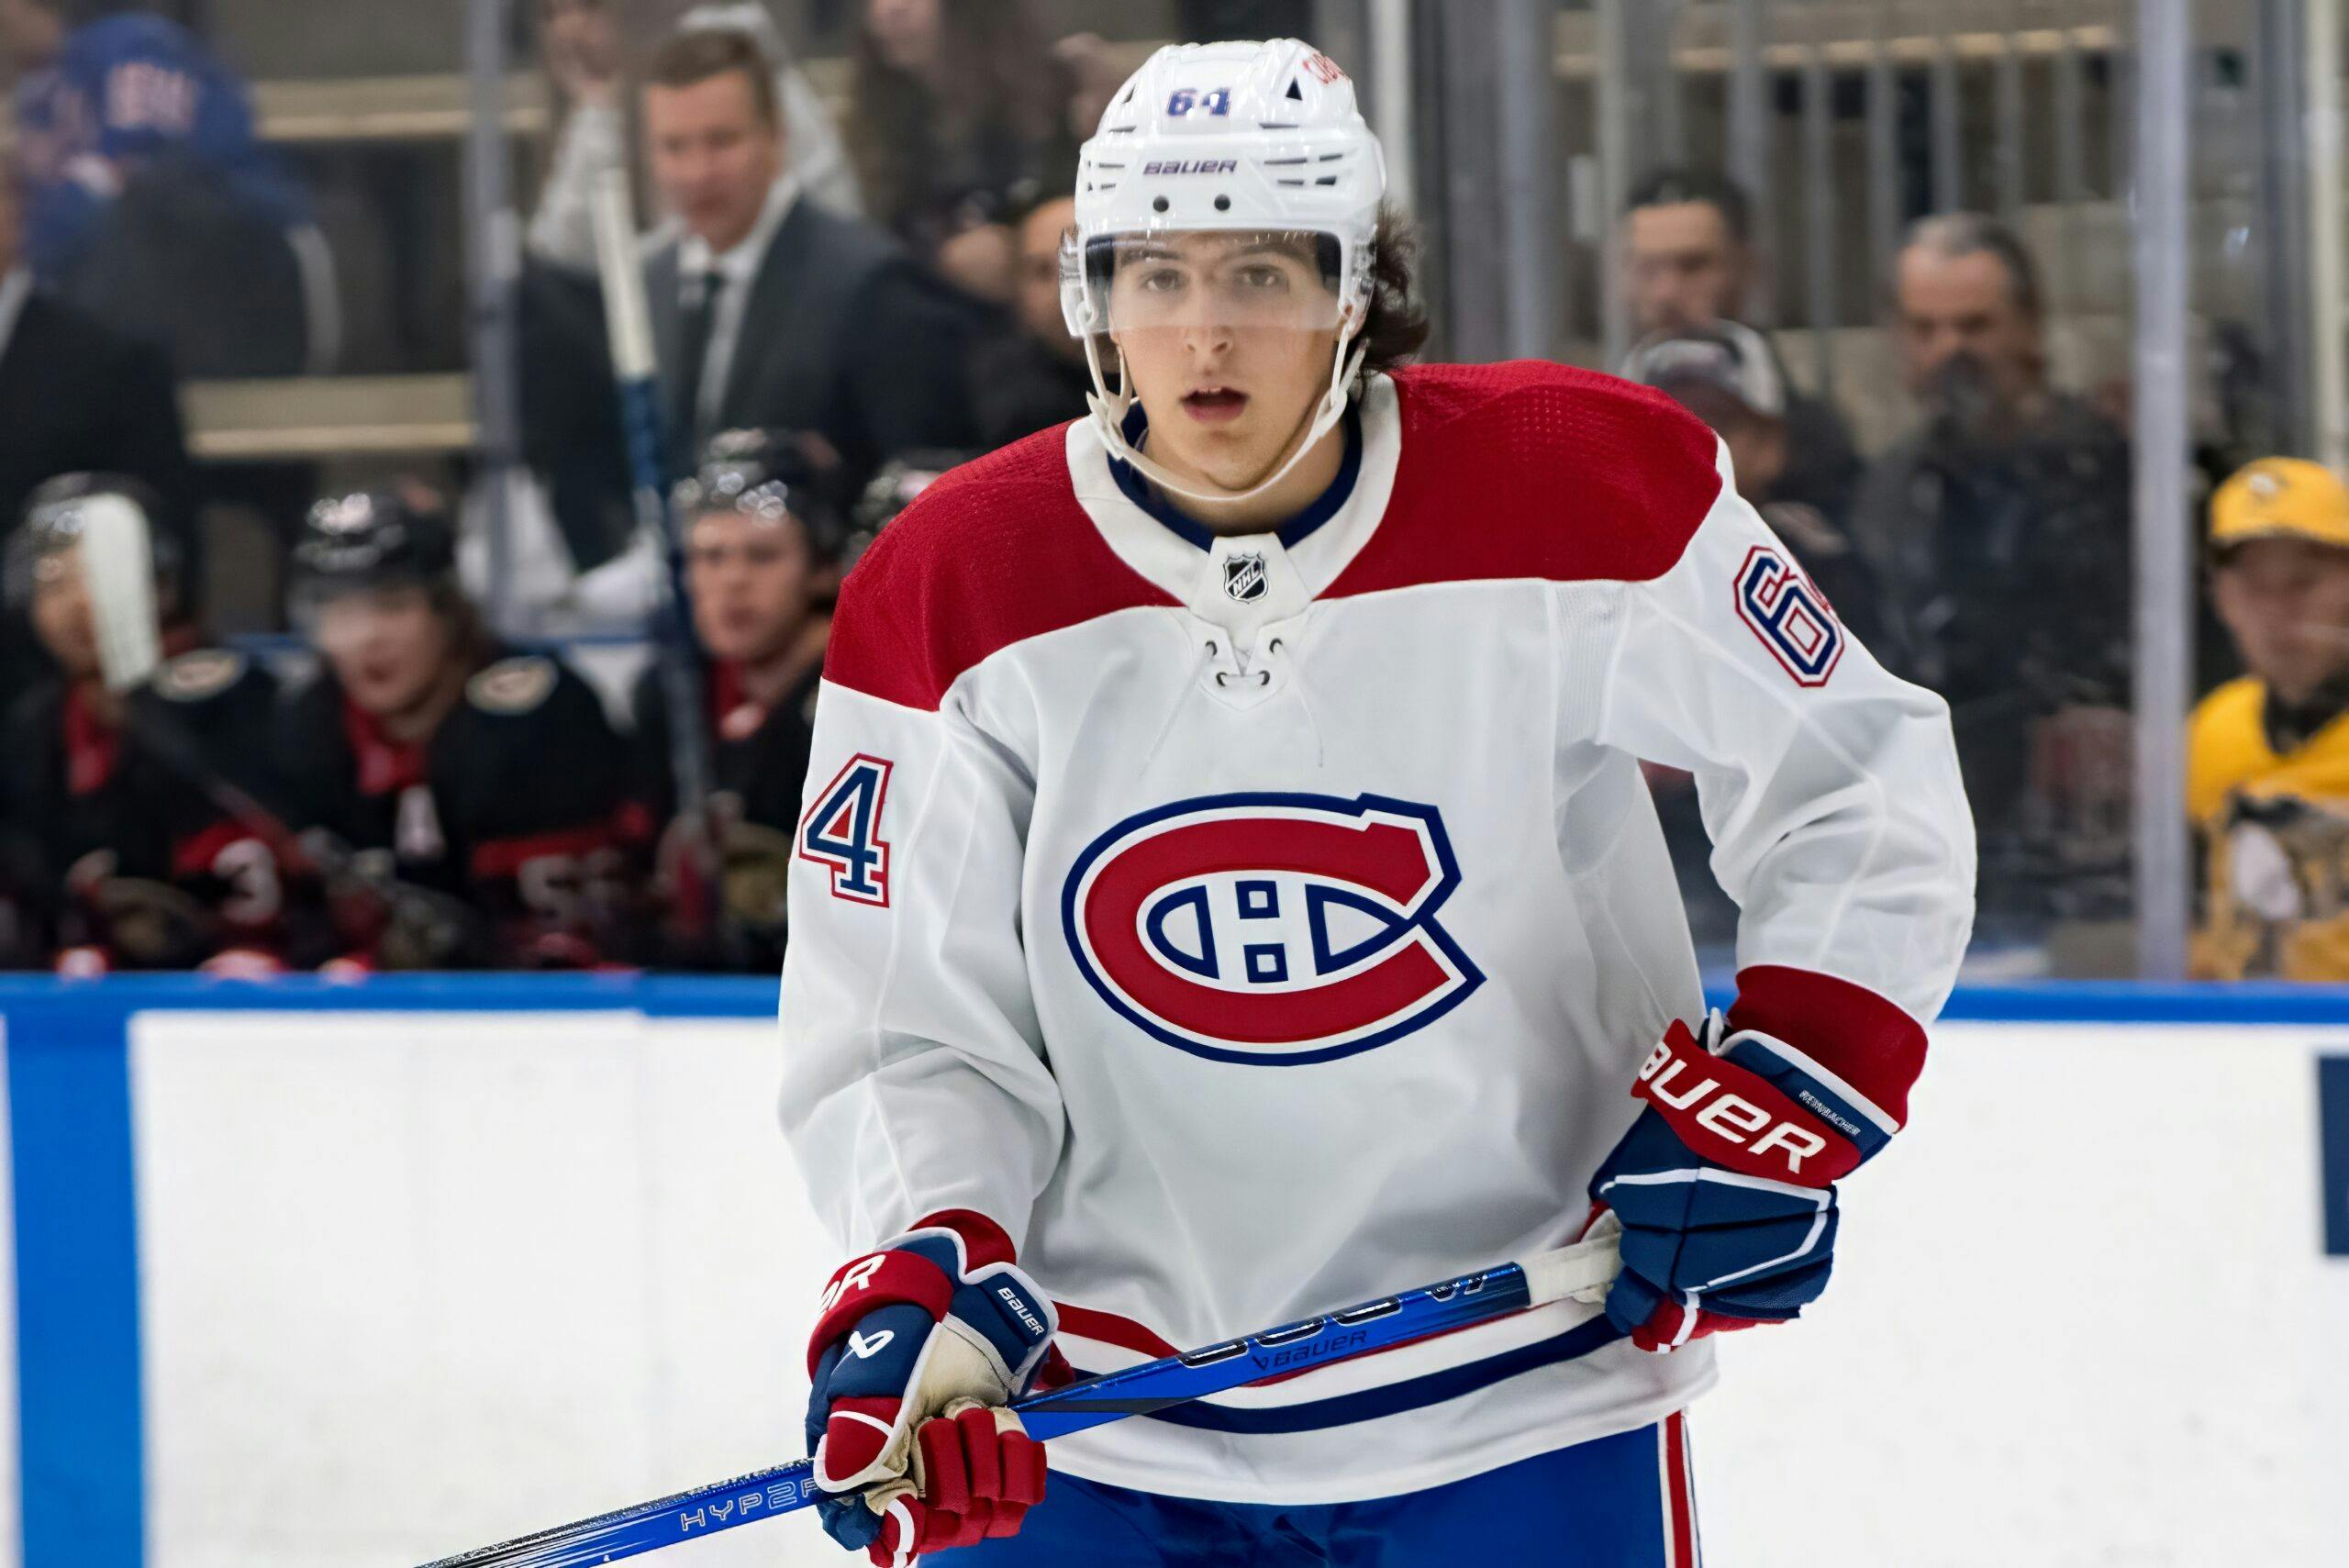 Sandwiches and knuckle sandwiches: Prospect tourney an eye opener for Canadiens’ David Reinbacher